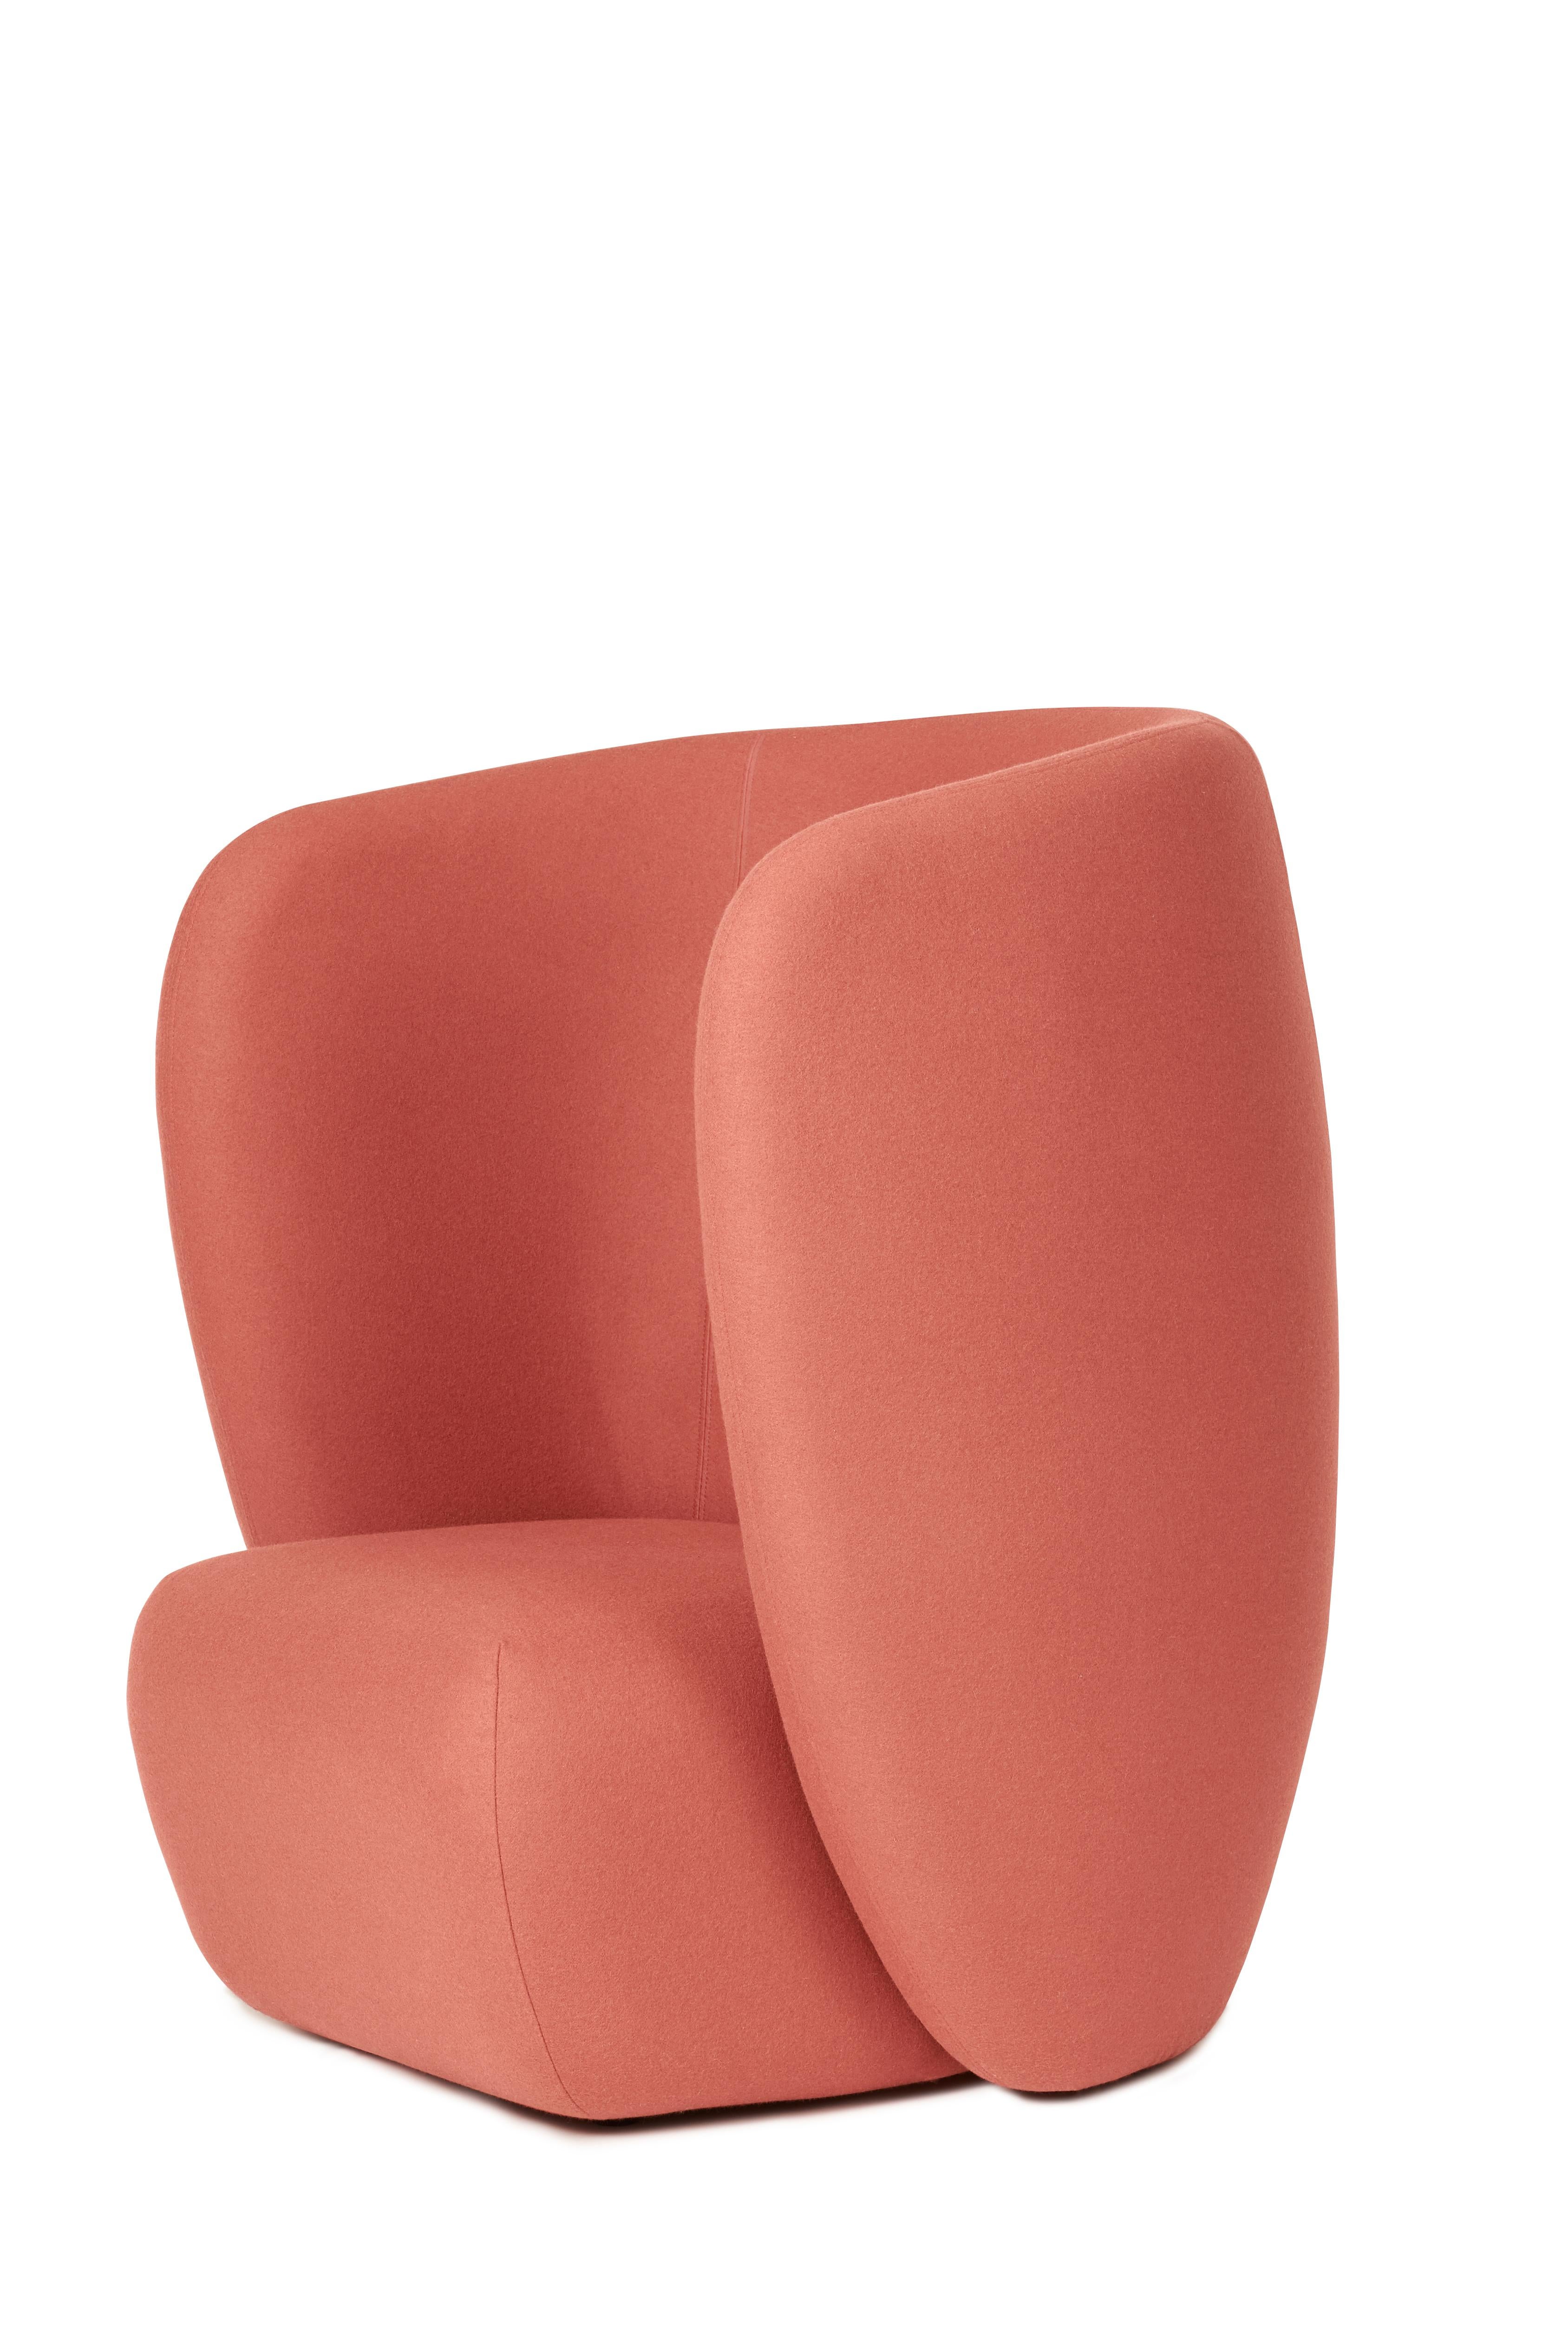 For Sale: Pink (Hero 541) Haven Lounge Chair, by Charlotte Høncke from Warm Nordic 2